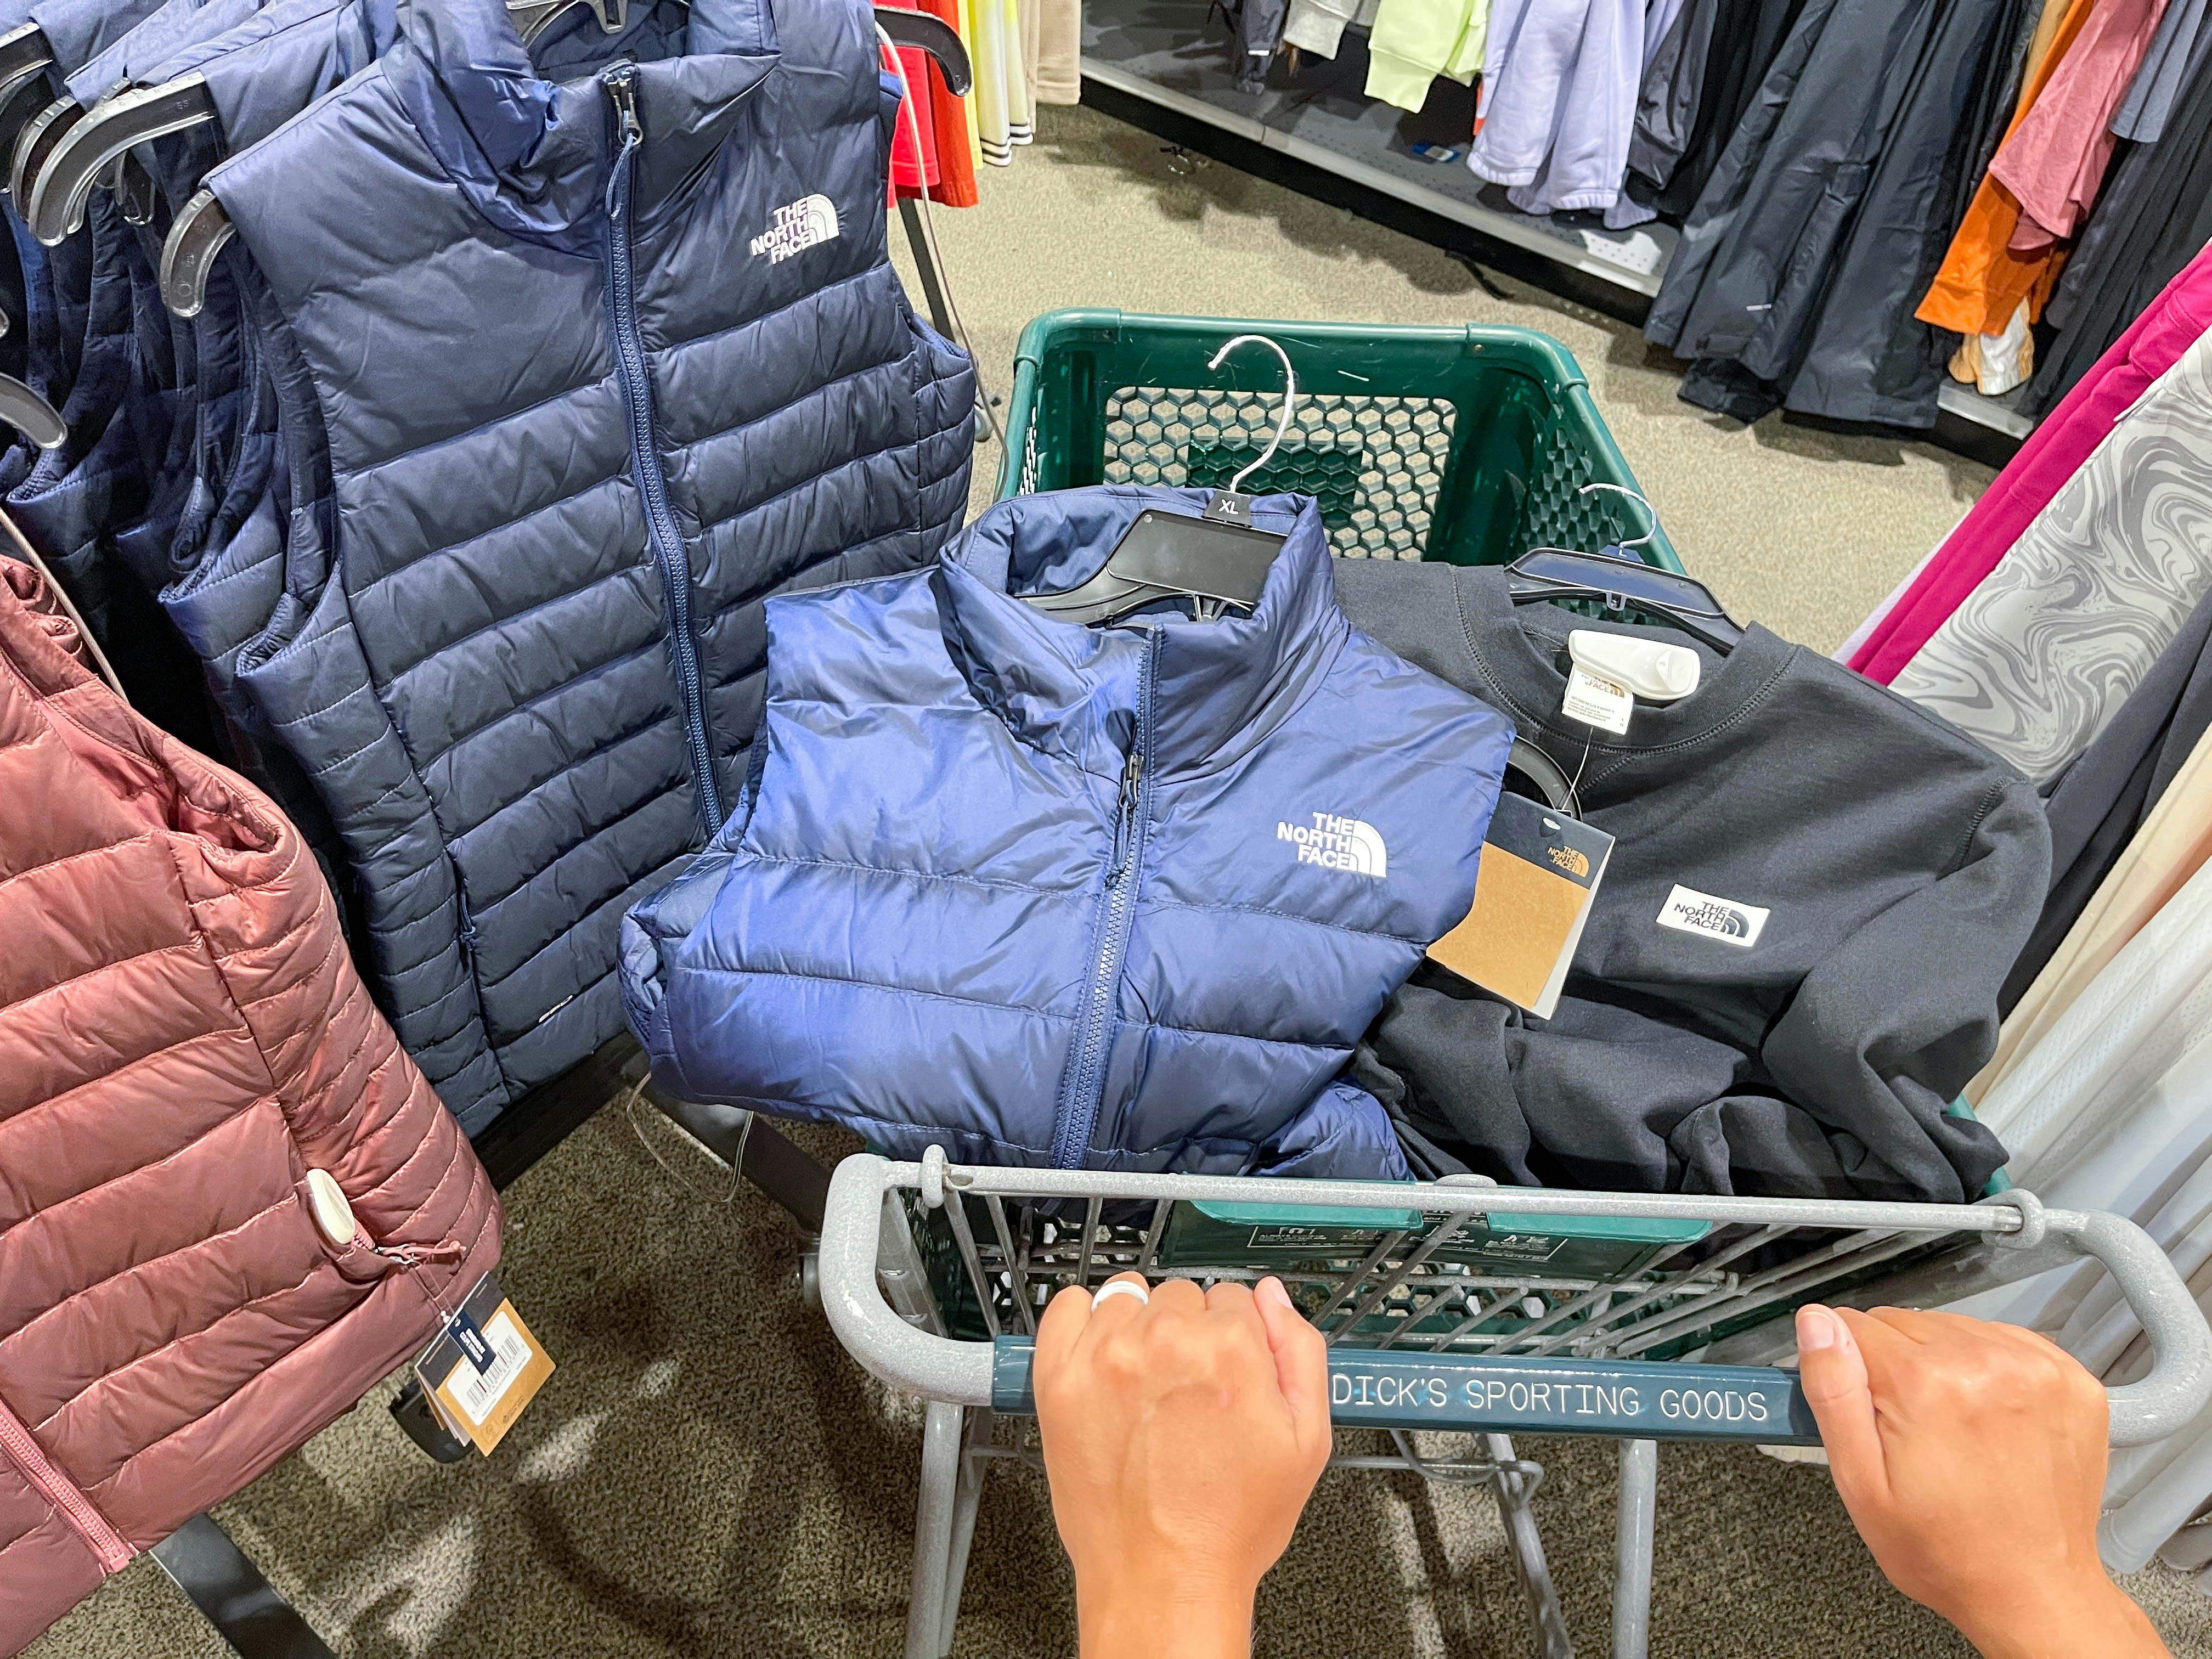 The North Face Black Friday 2022: Tips to Save - The Krazy Coupon Lady